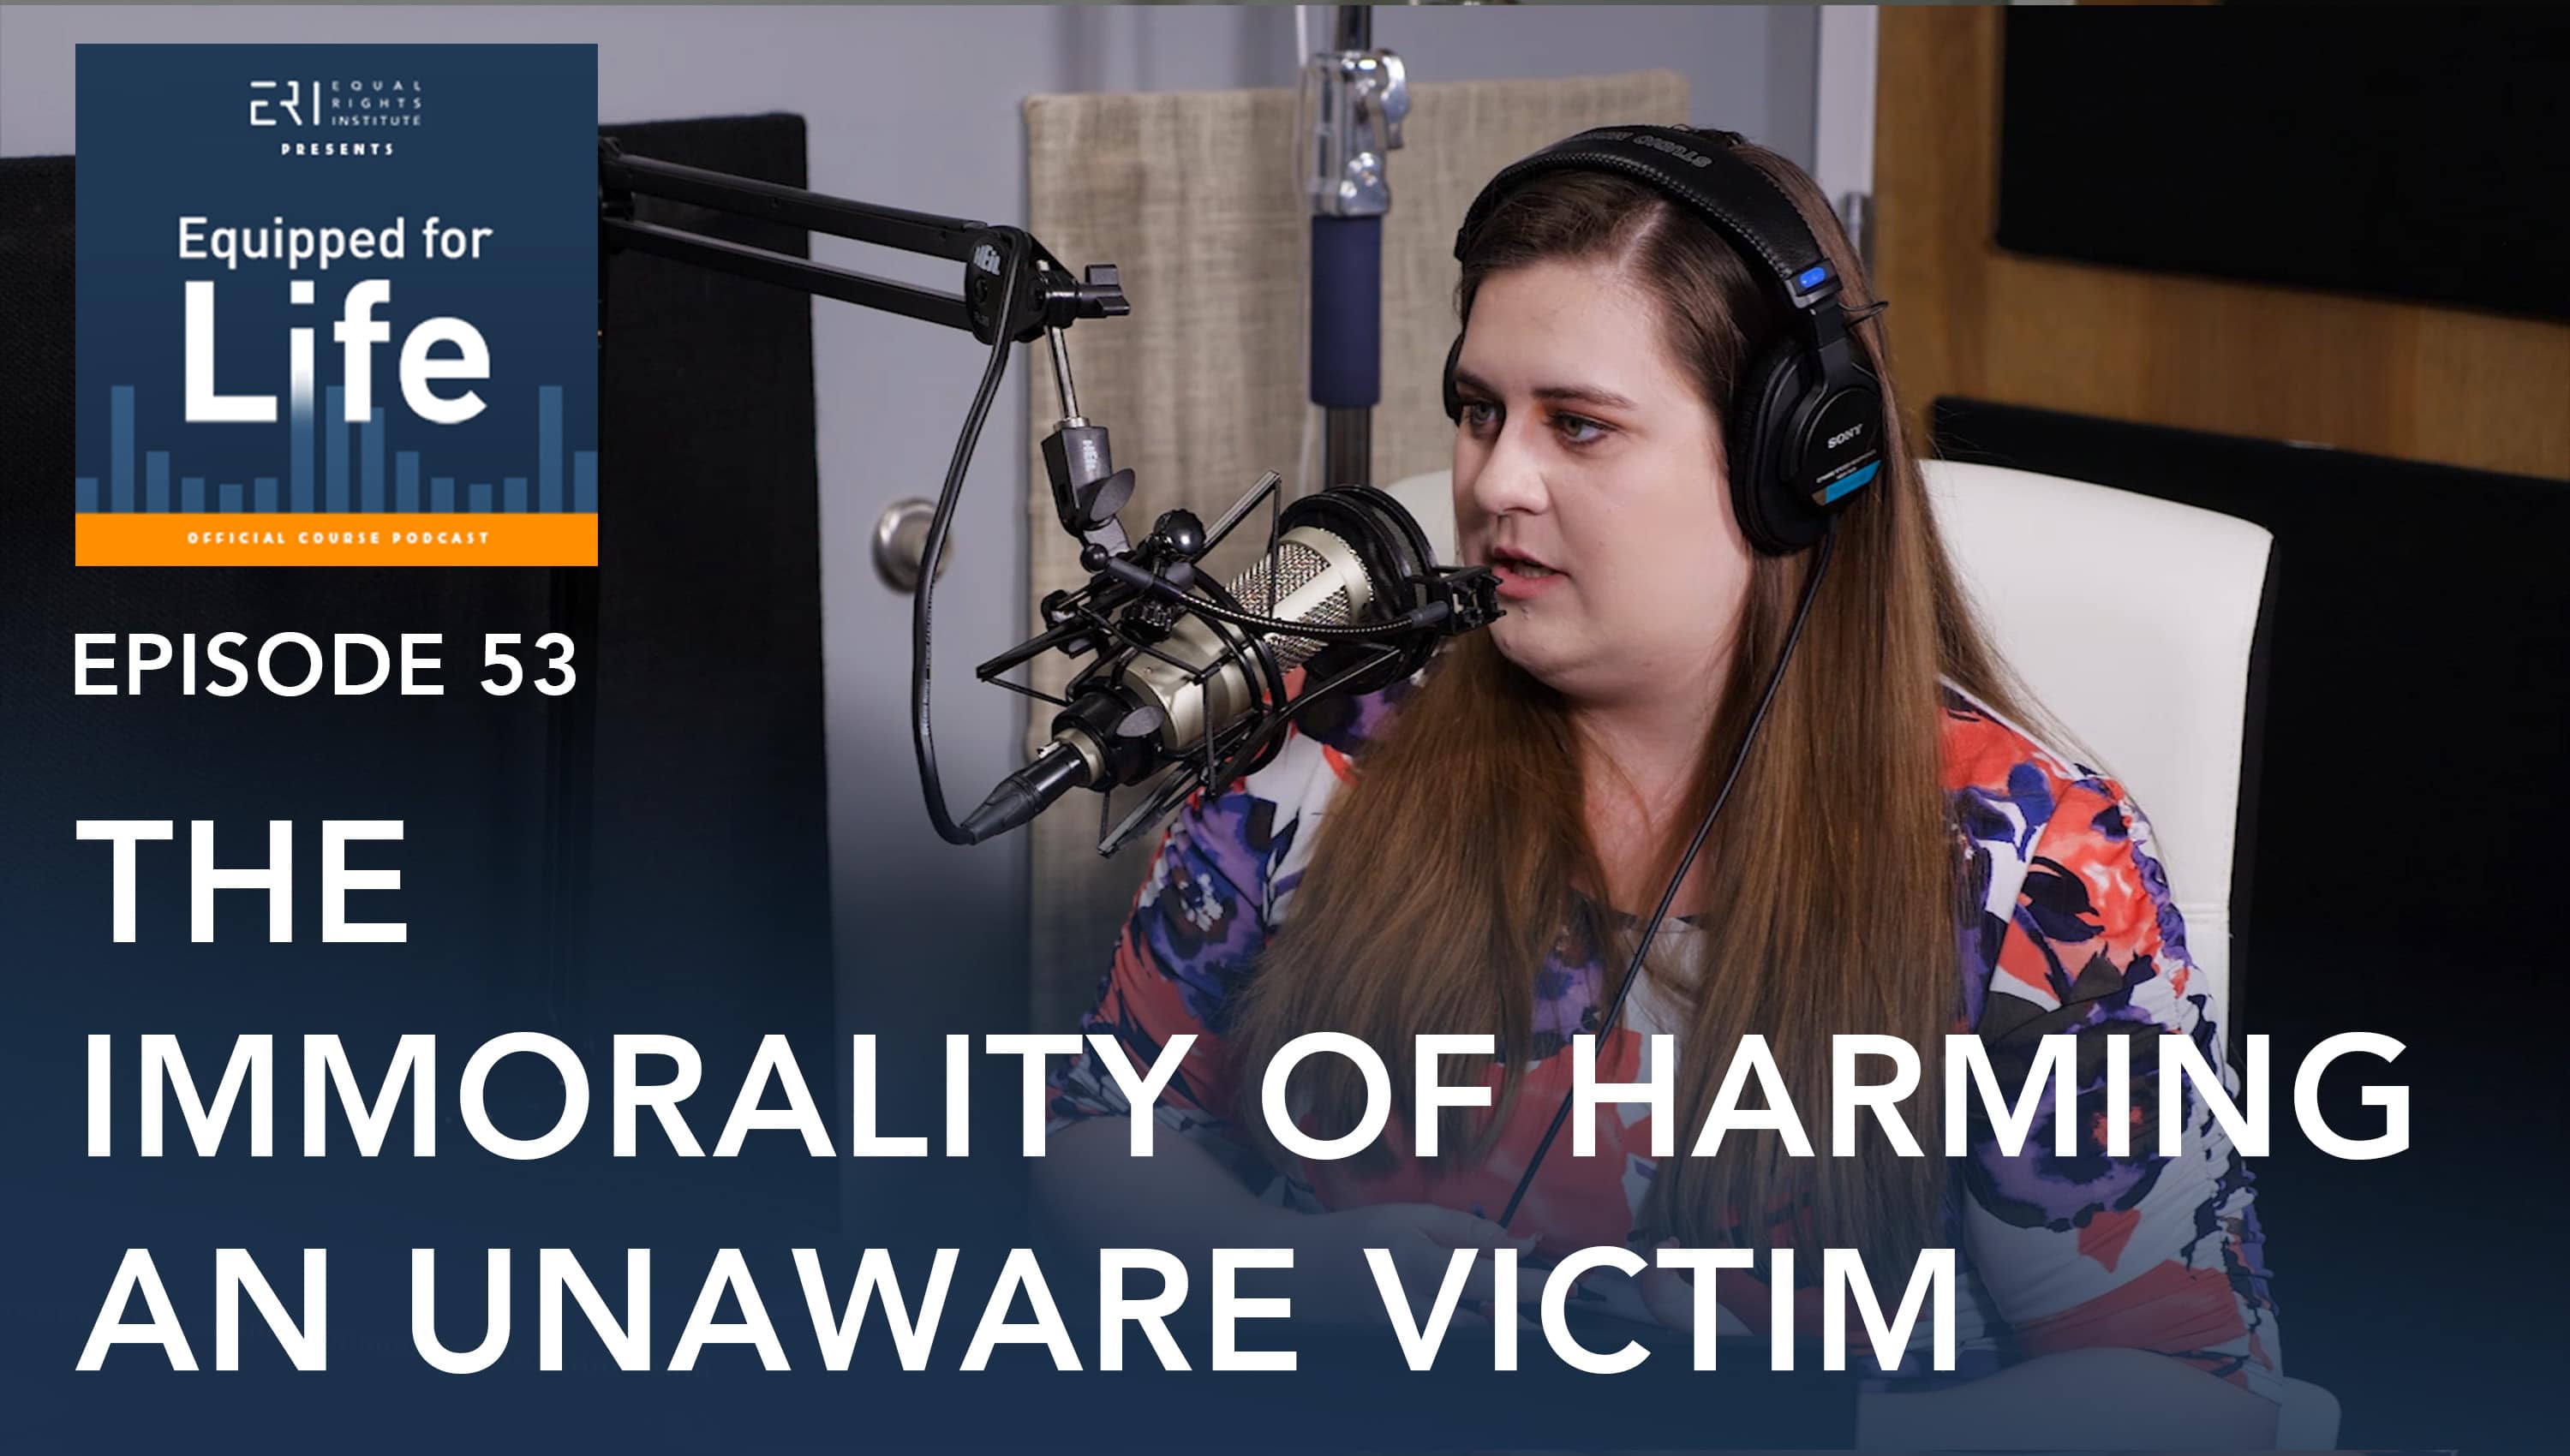 The Immorality of Harming an Unaware Victim